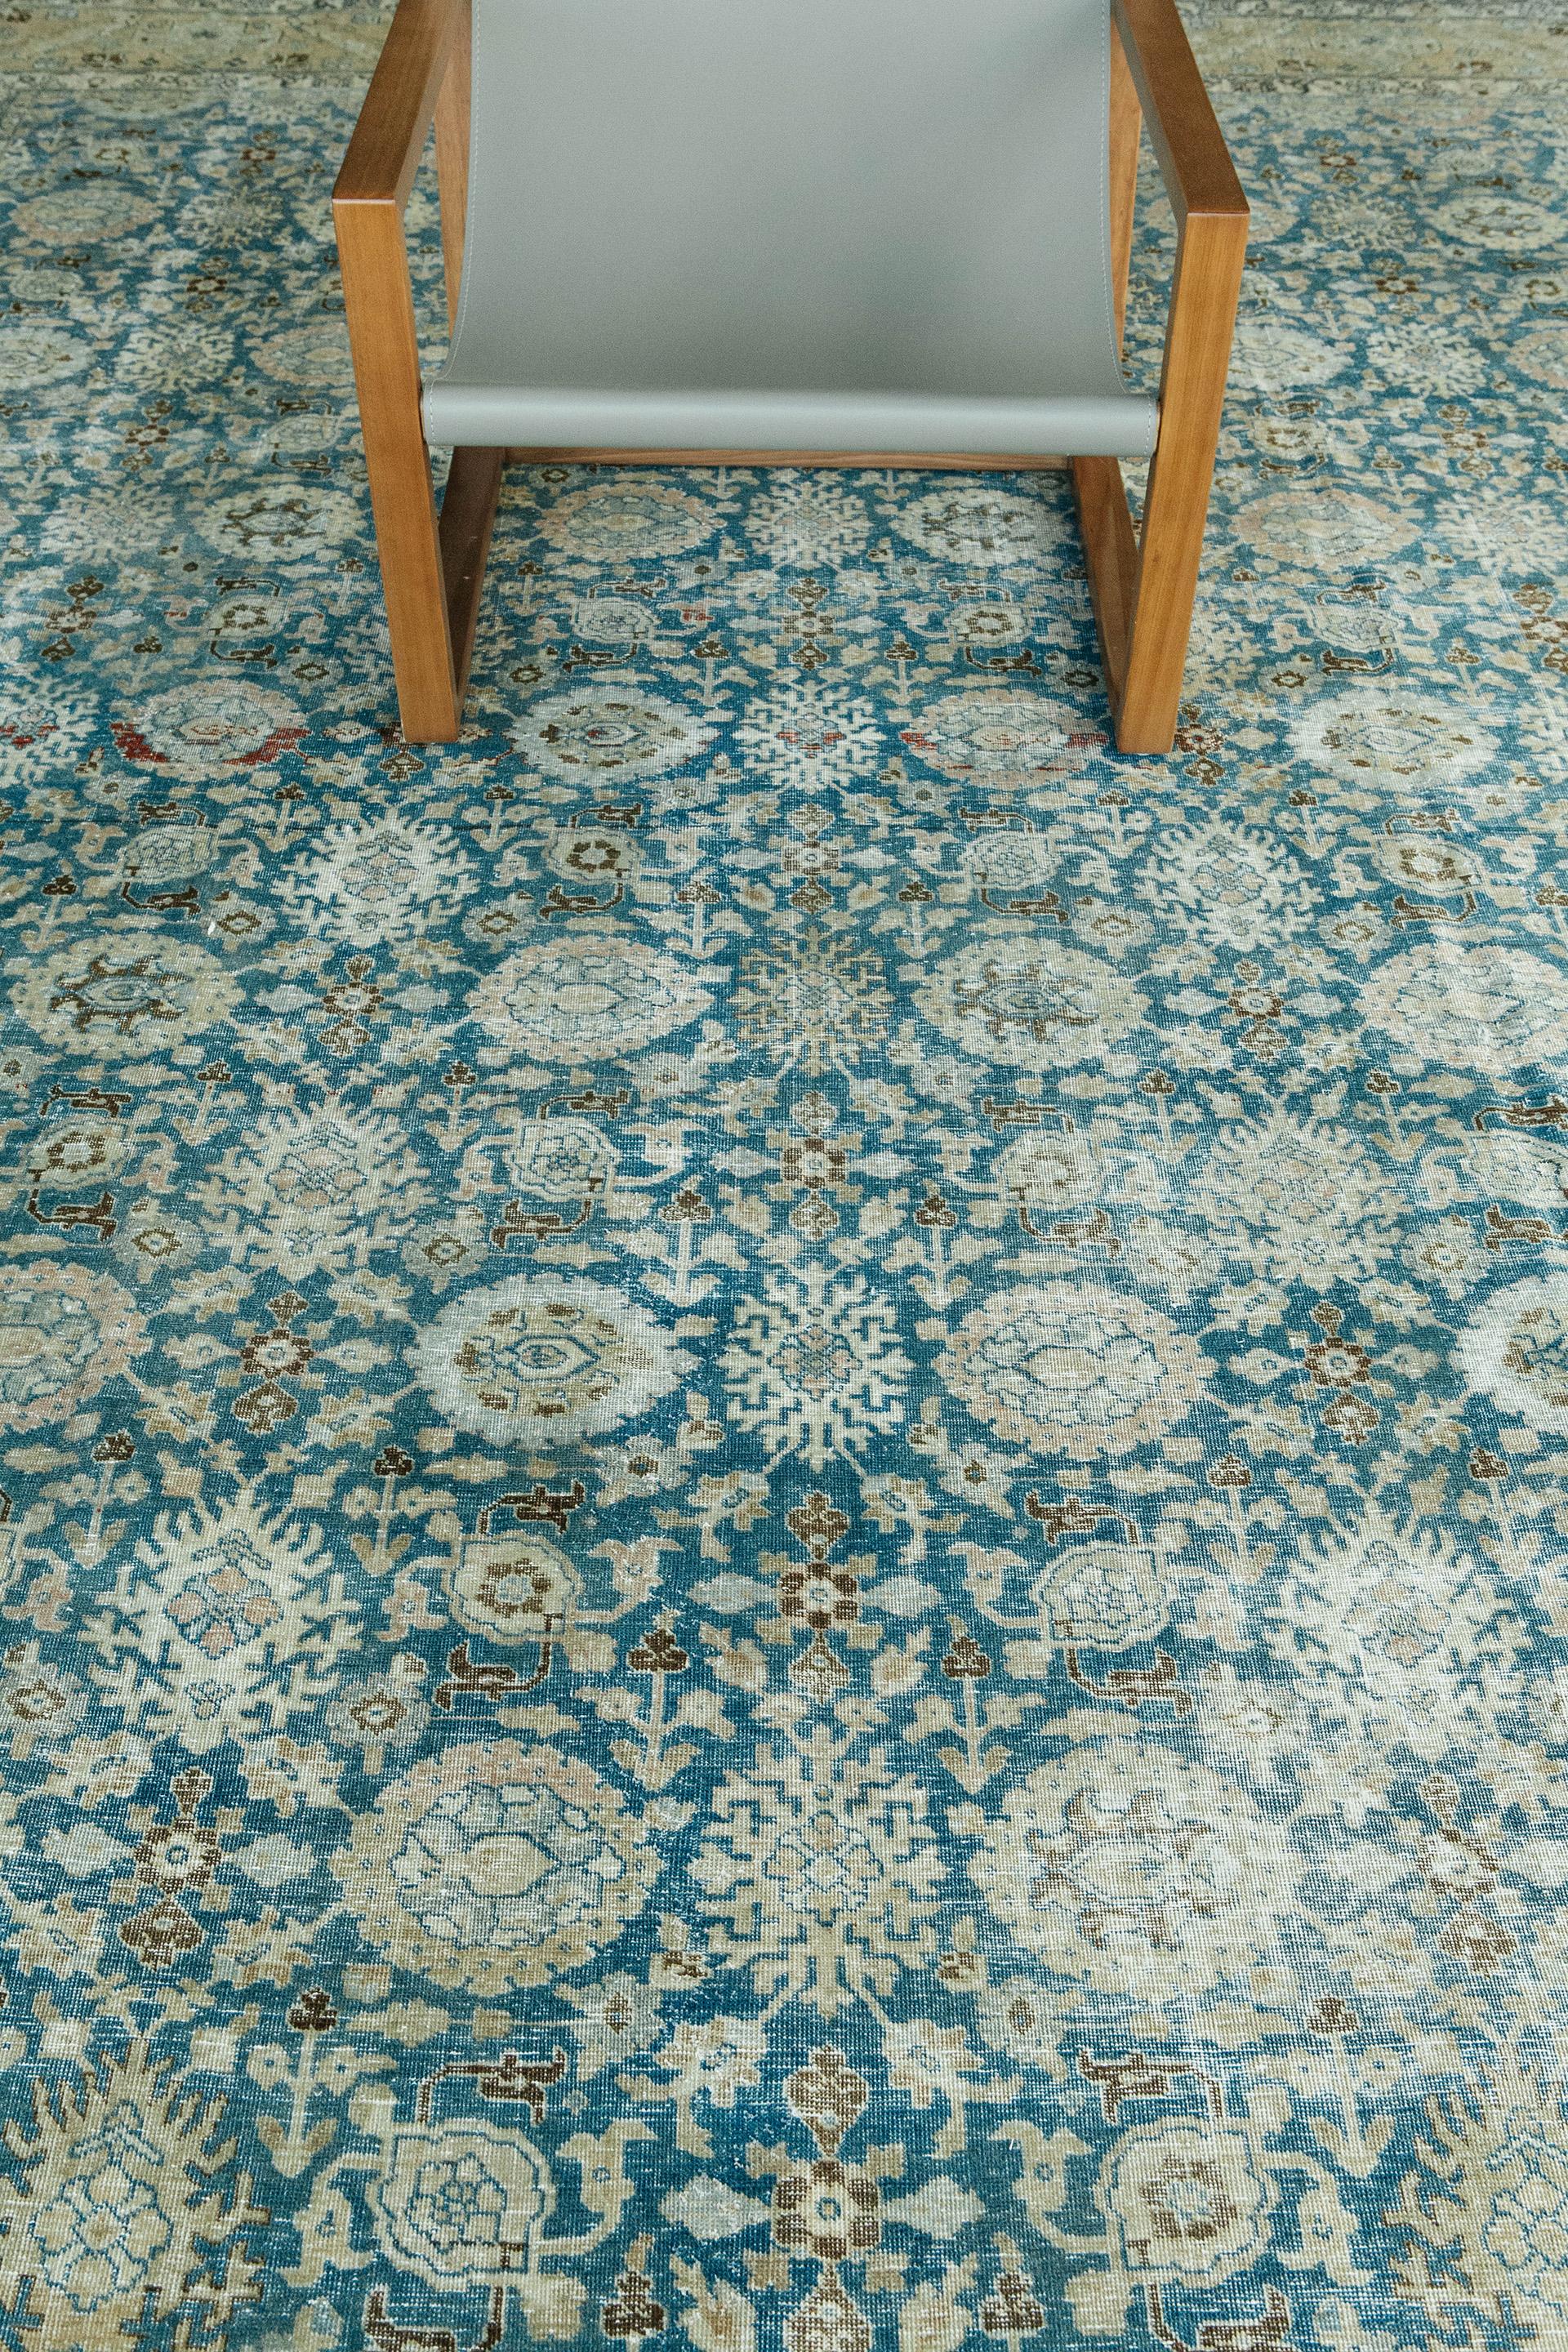 With strict standards of craftsmanship and quality of materials used, this Tabriz rug captures the sophistication and refinement of the classical Safavid Court carpets. A beautiful border surrounding the jewel-toned blue creates a carpet ideal of